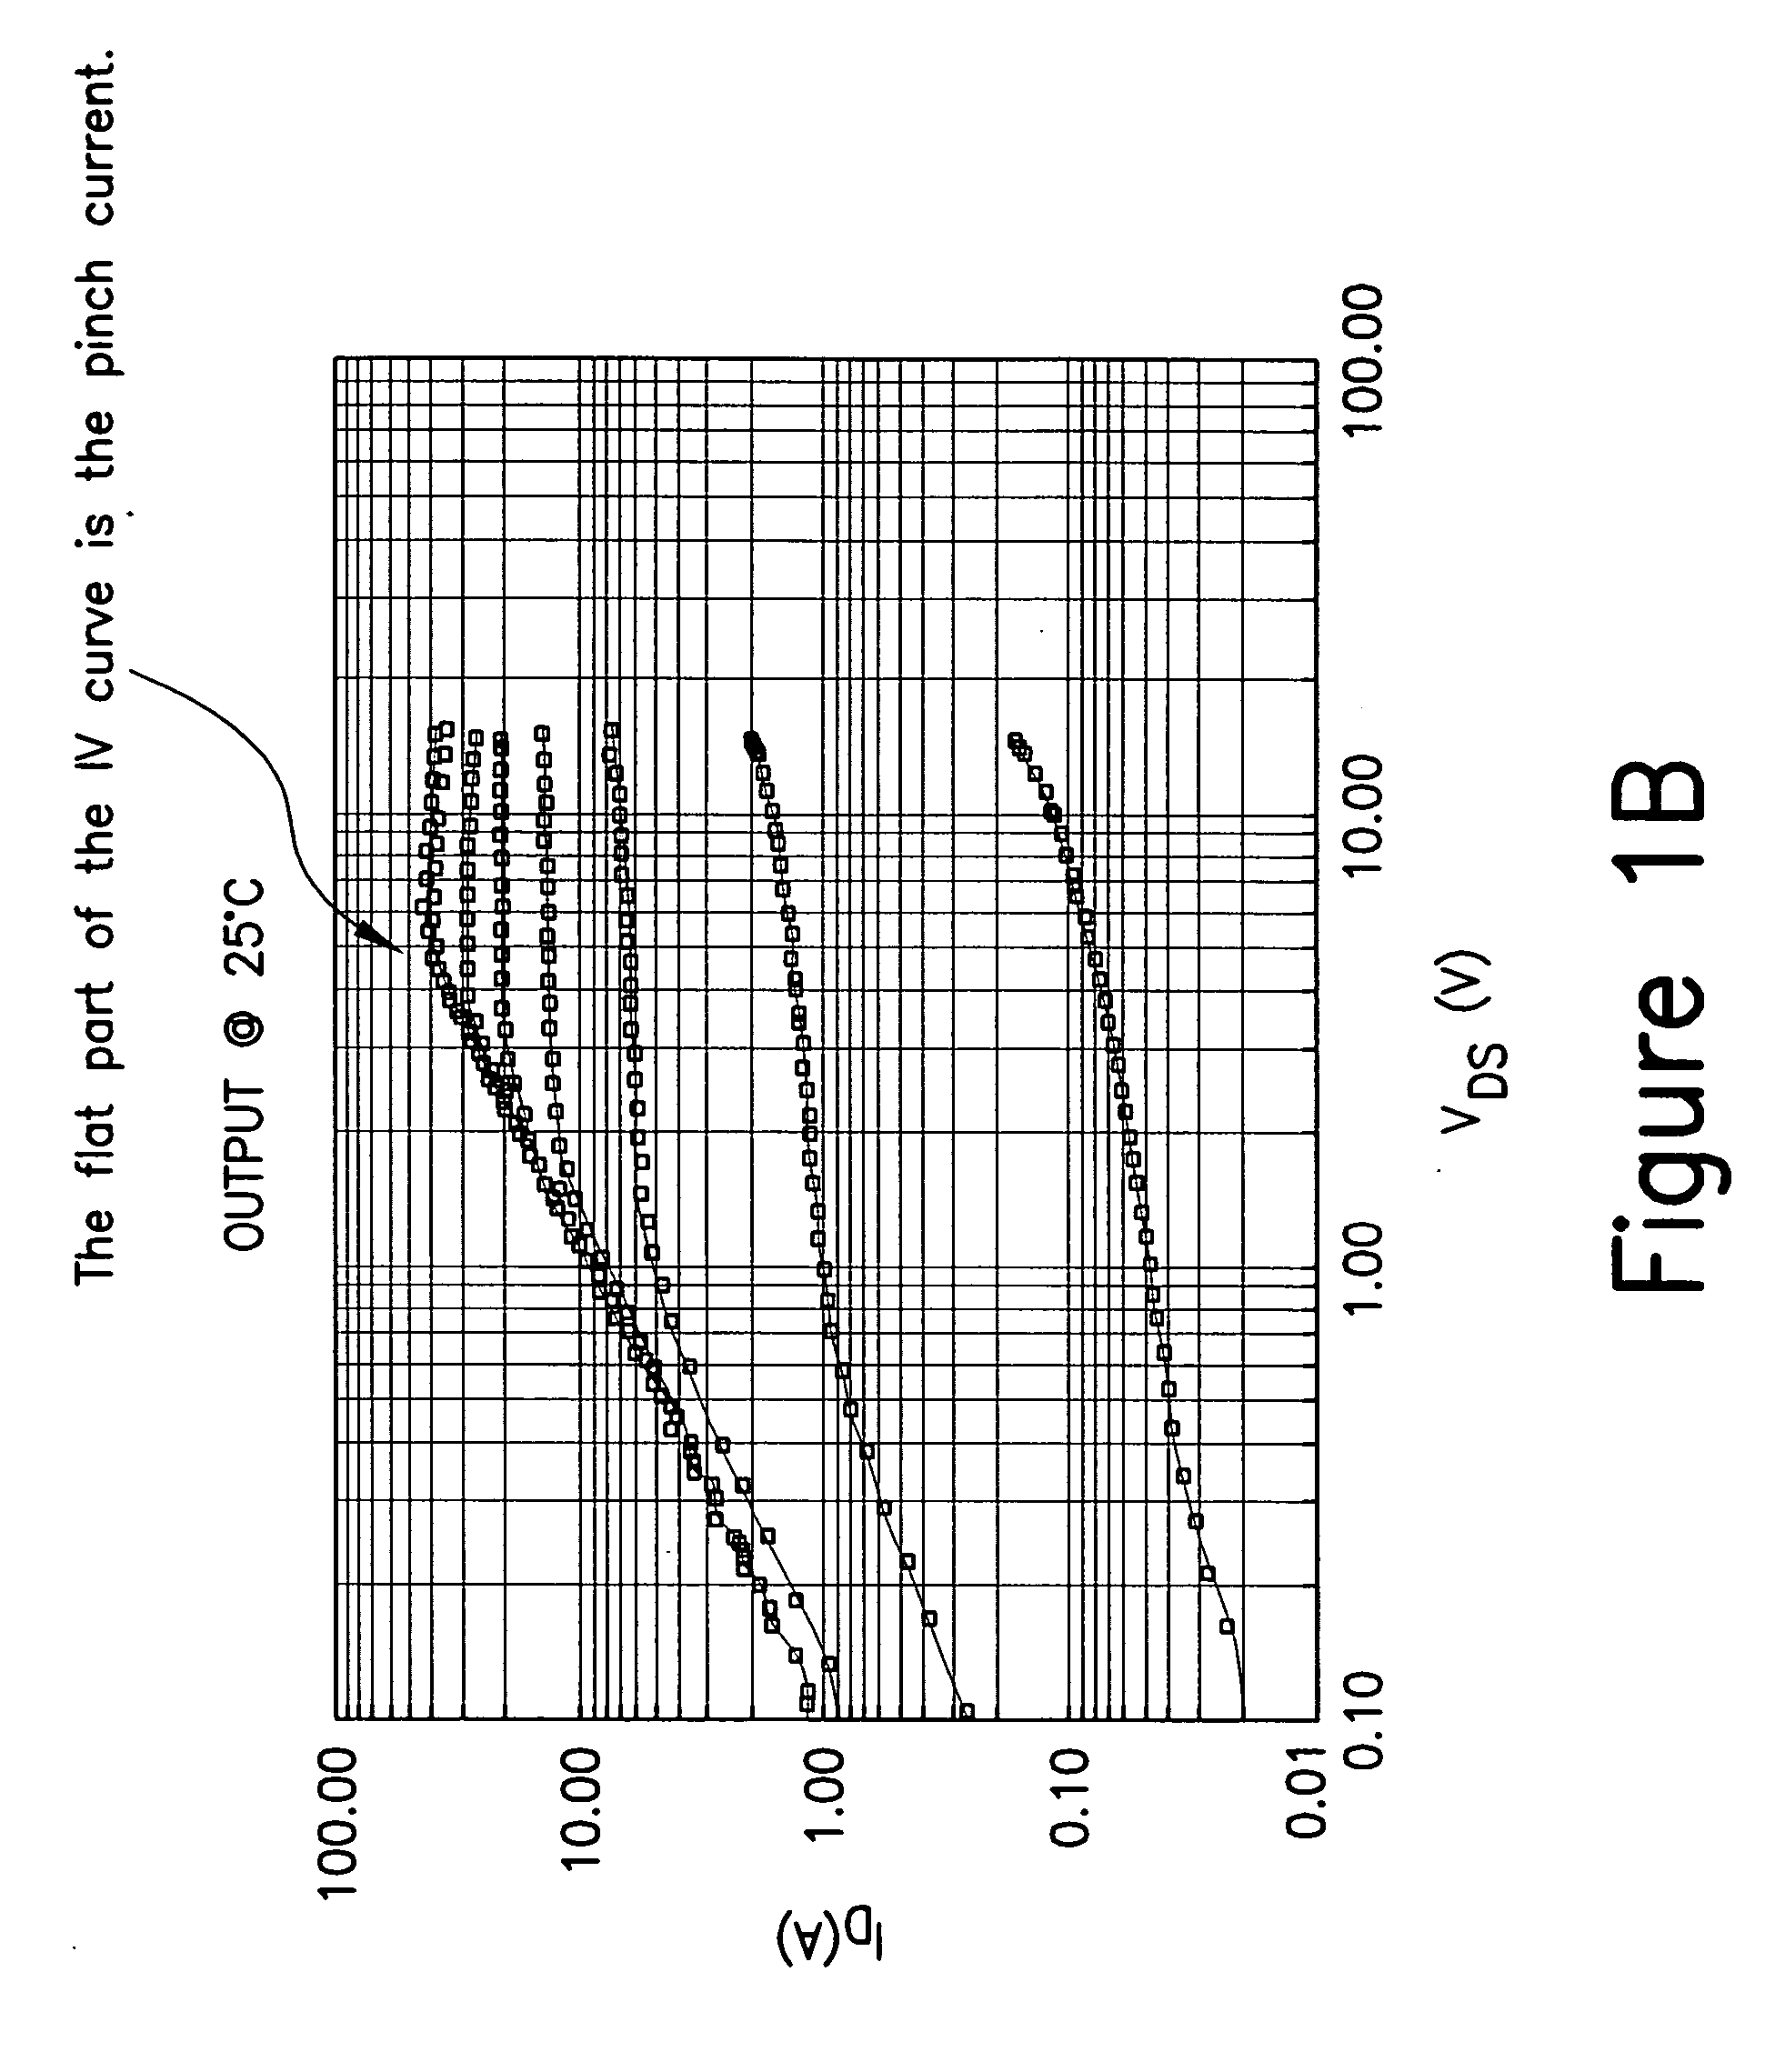 III-nitride current control device and method of manufacture